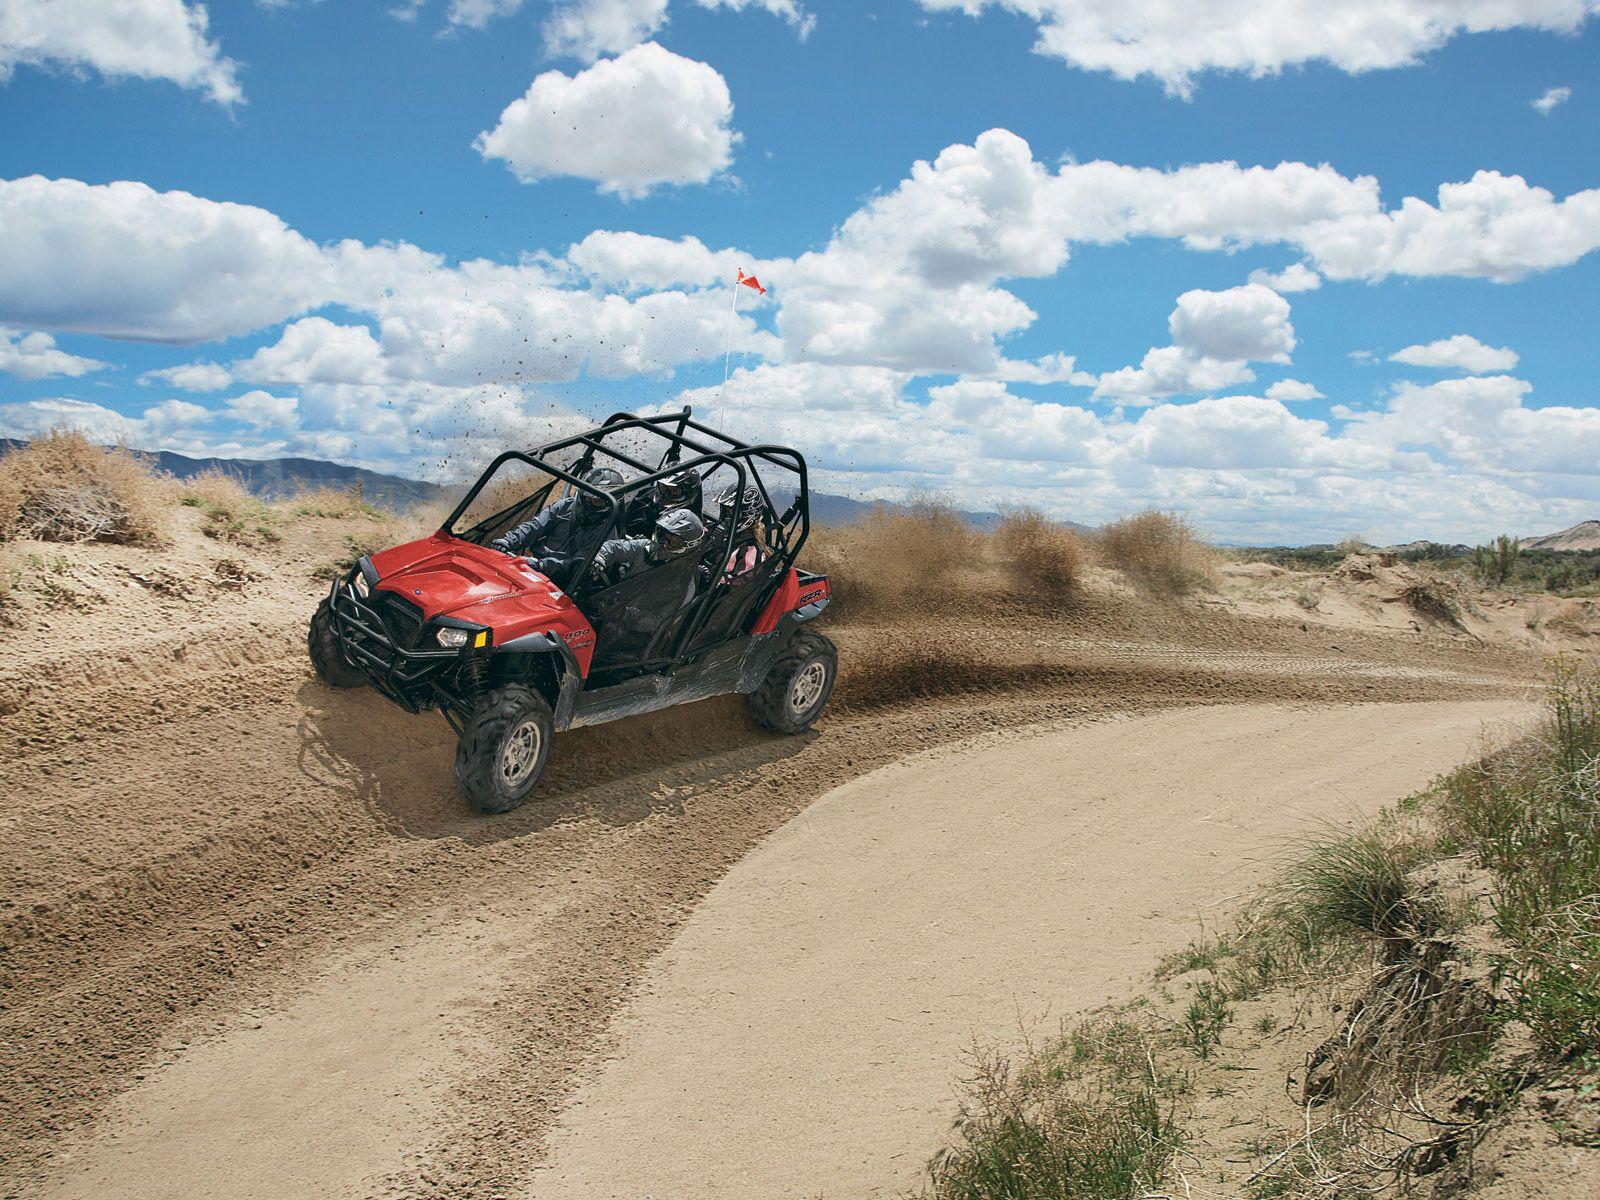 ATV picture, wallpaper, specs, insurance, accident lawyers: 2012 Ranger RZR 4 800 Robby Gordon Edition ATV picture